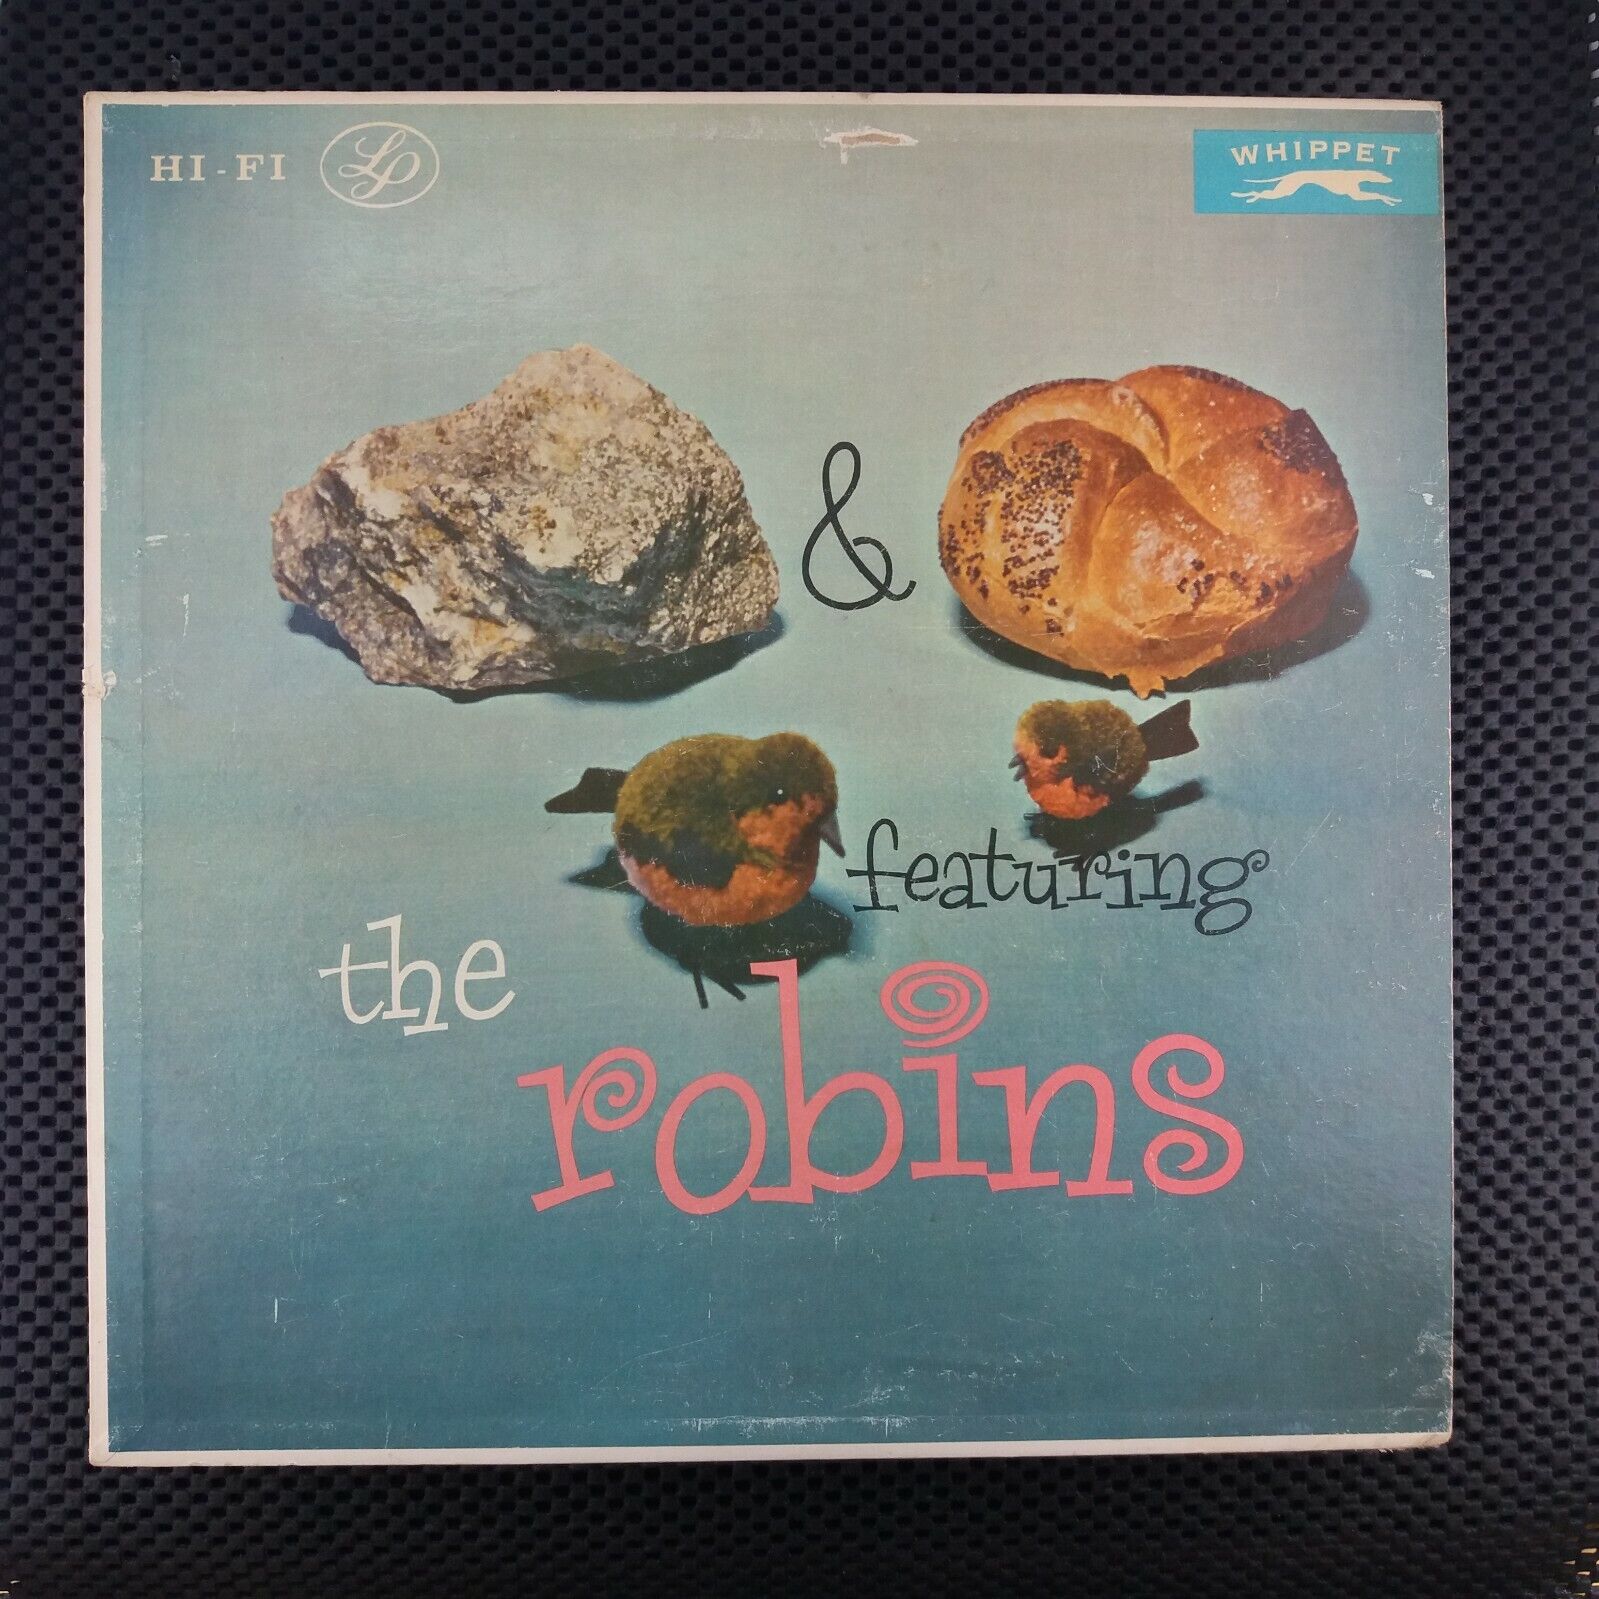 JACKET ONLY NO ALBUM The Robins – Rock & Roll